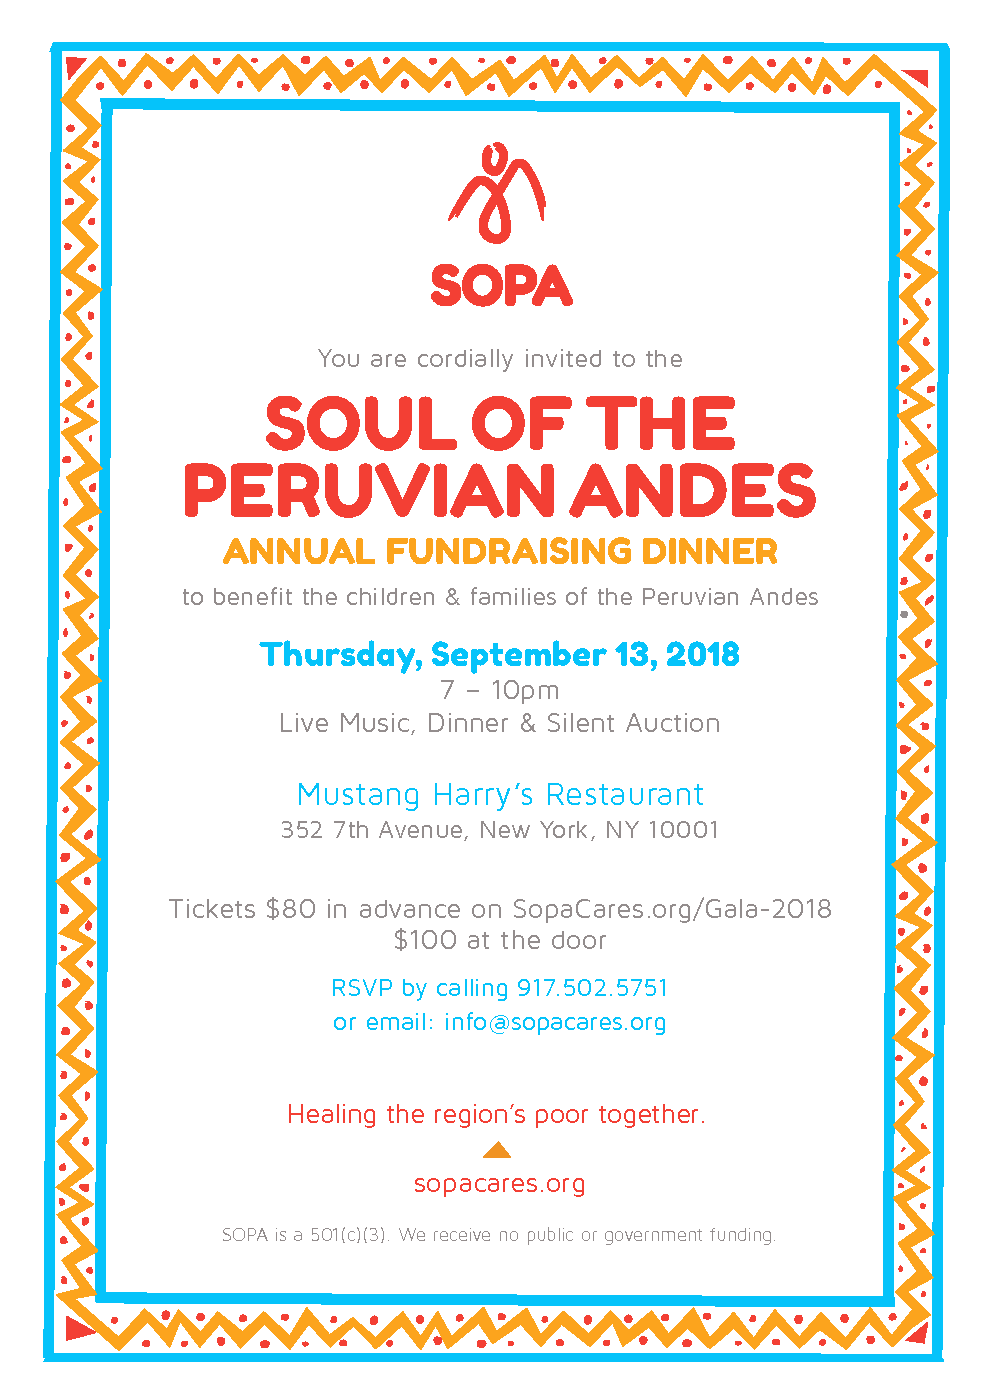 September 2018 Fundraising Dinner Soul Of The Peruvian Andes